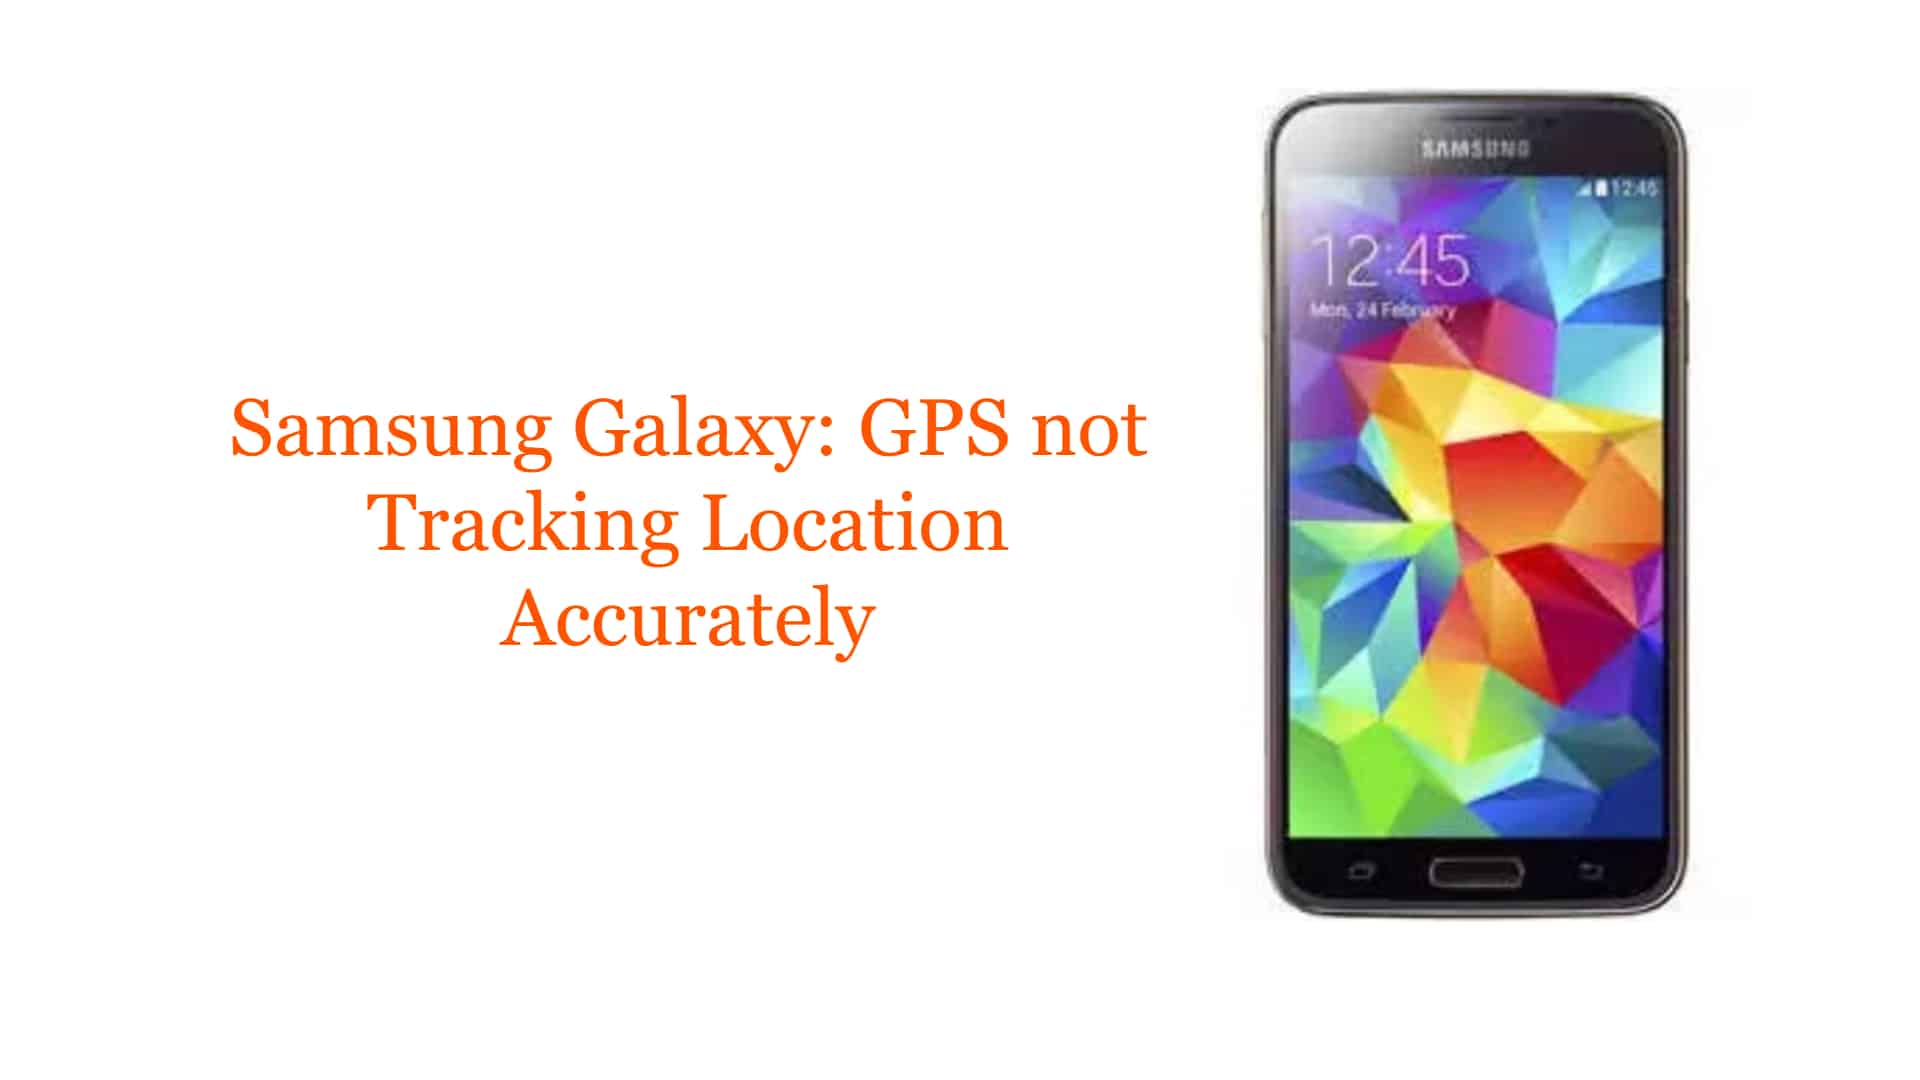 Samsung Galaxy: GPS Tracking Location Accurately